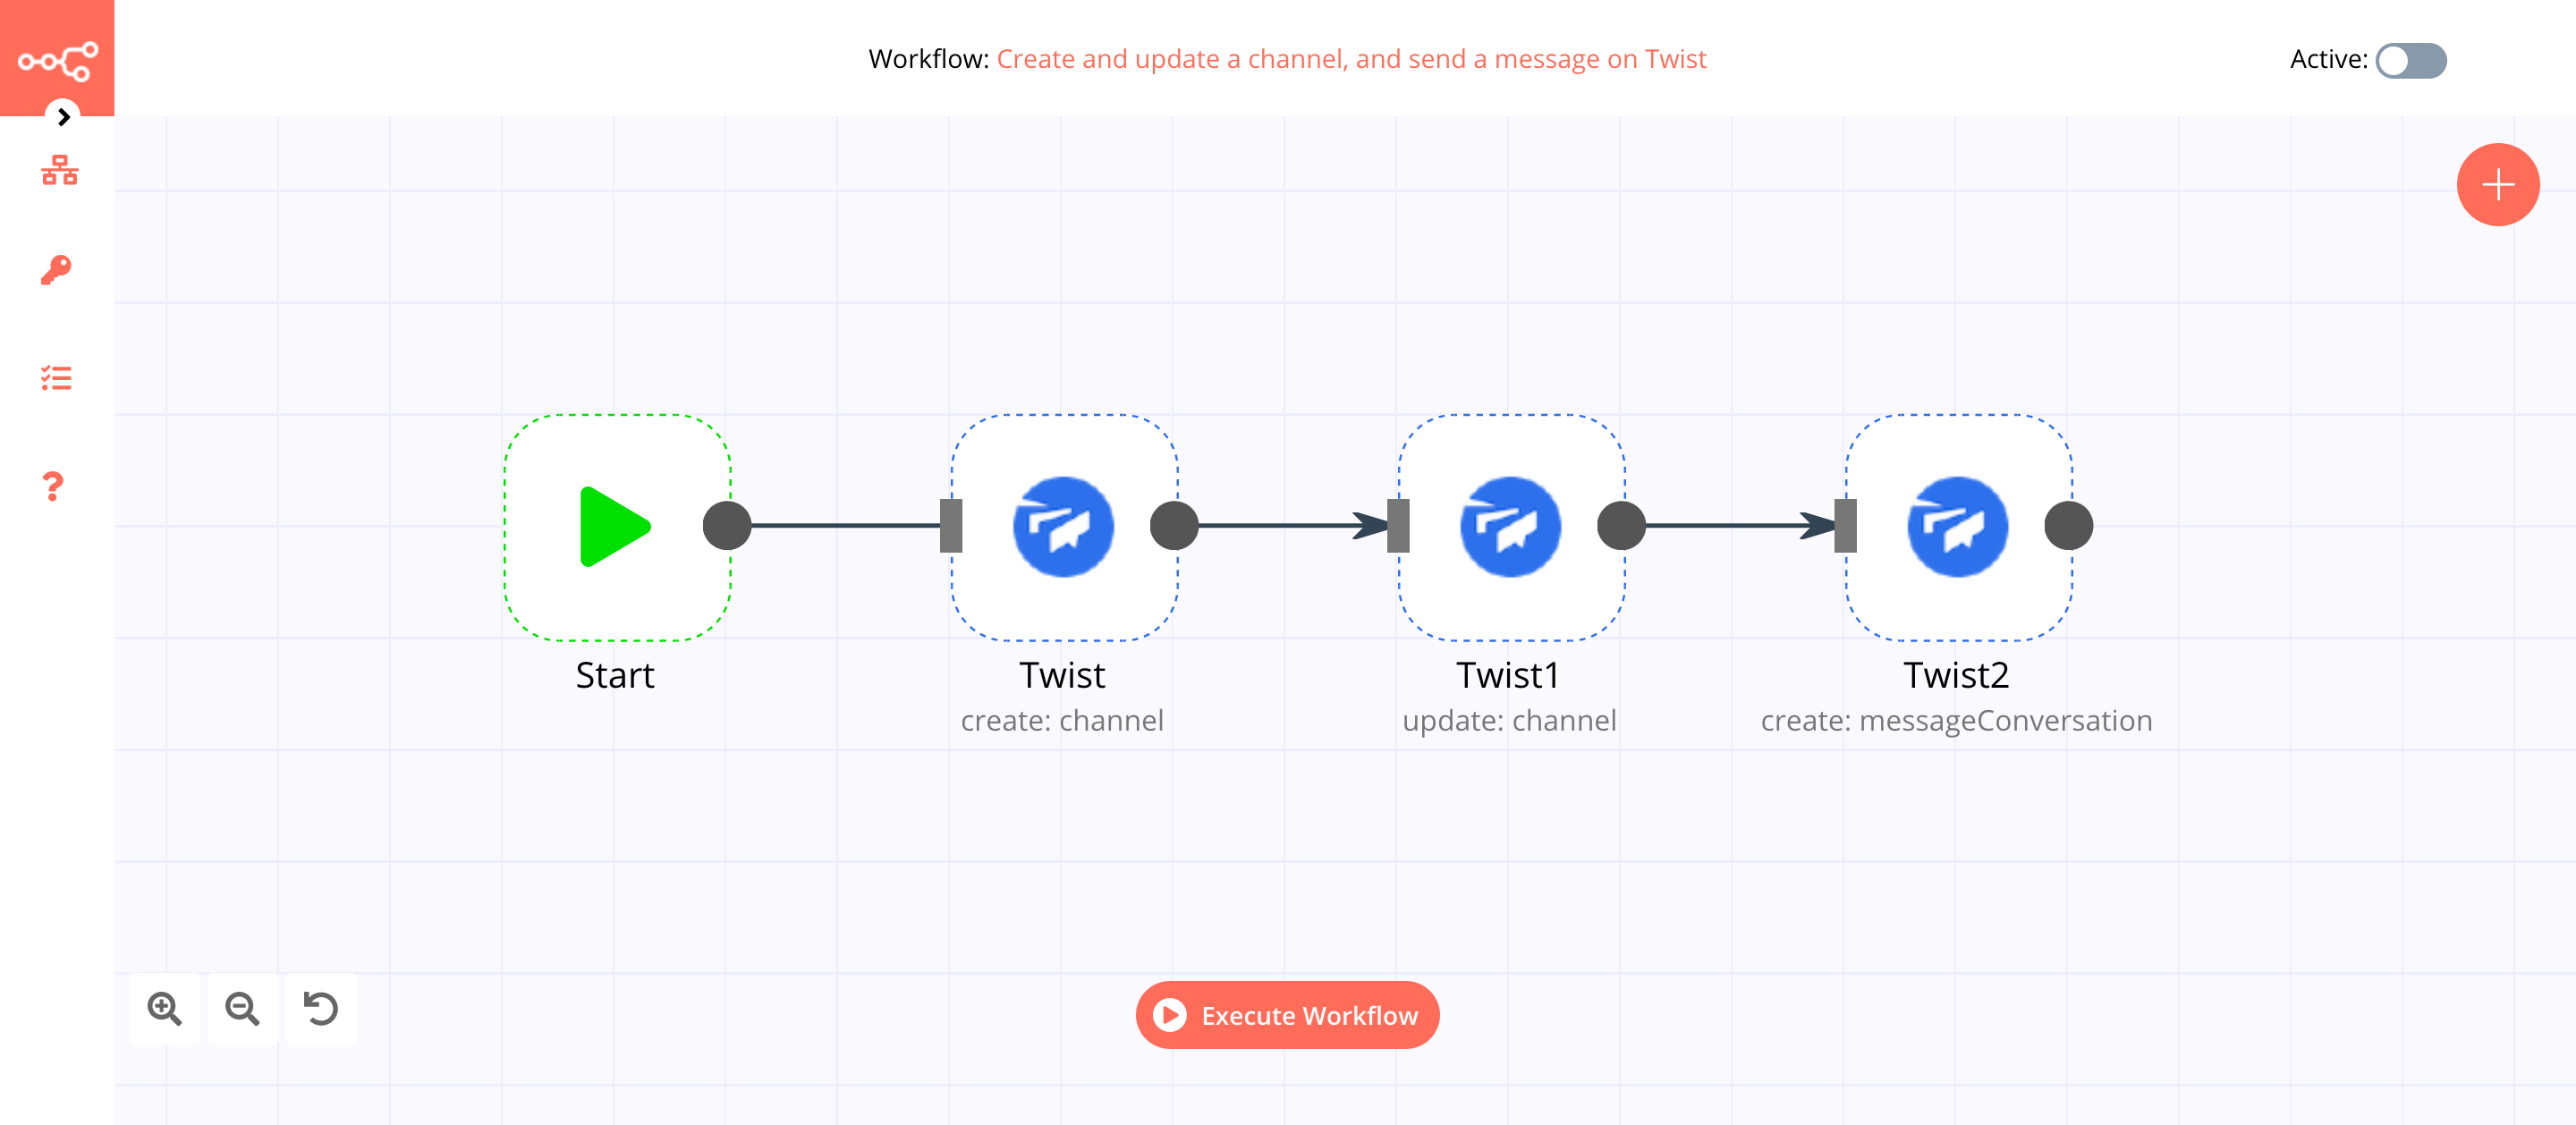 A workflow with the Twist node